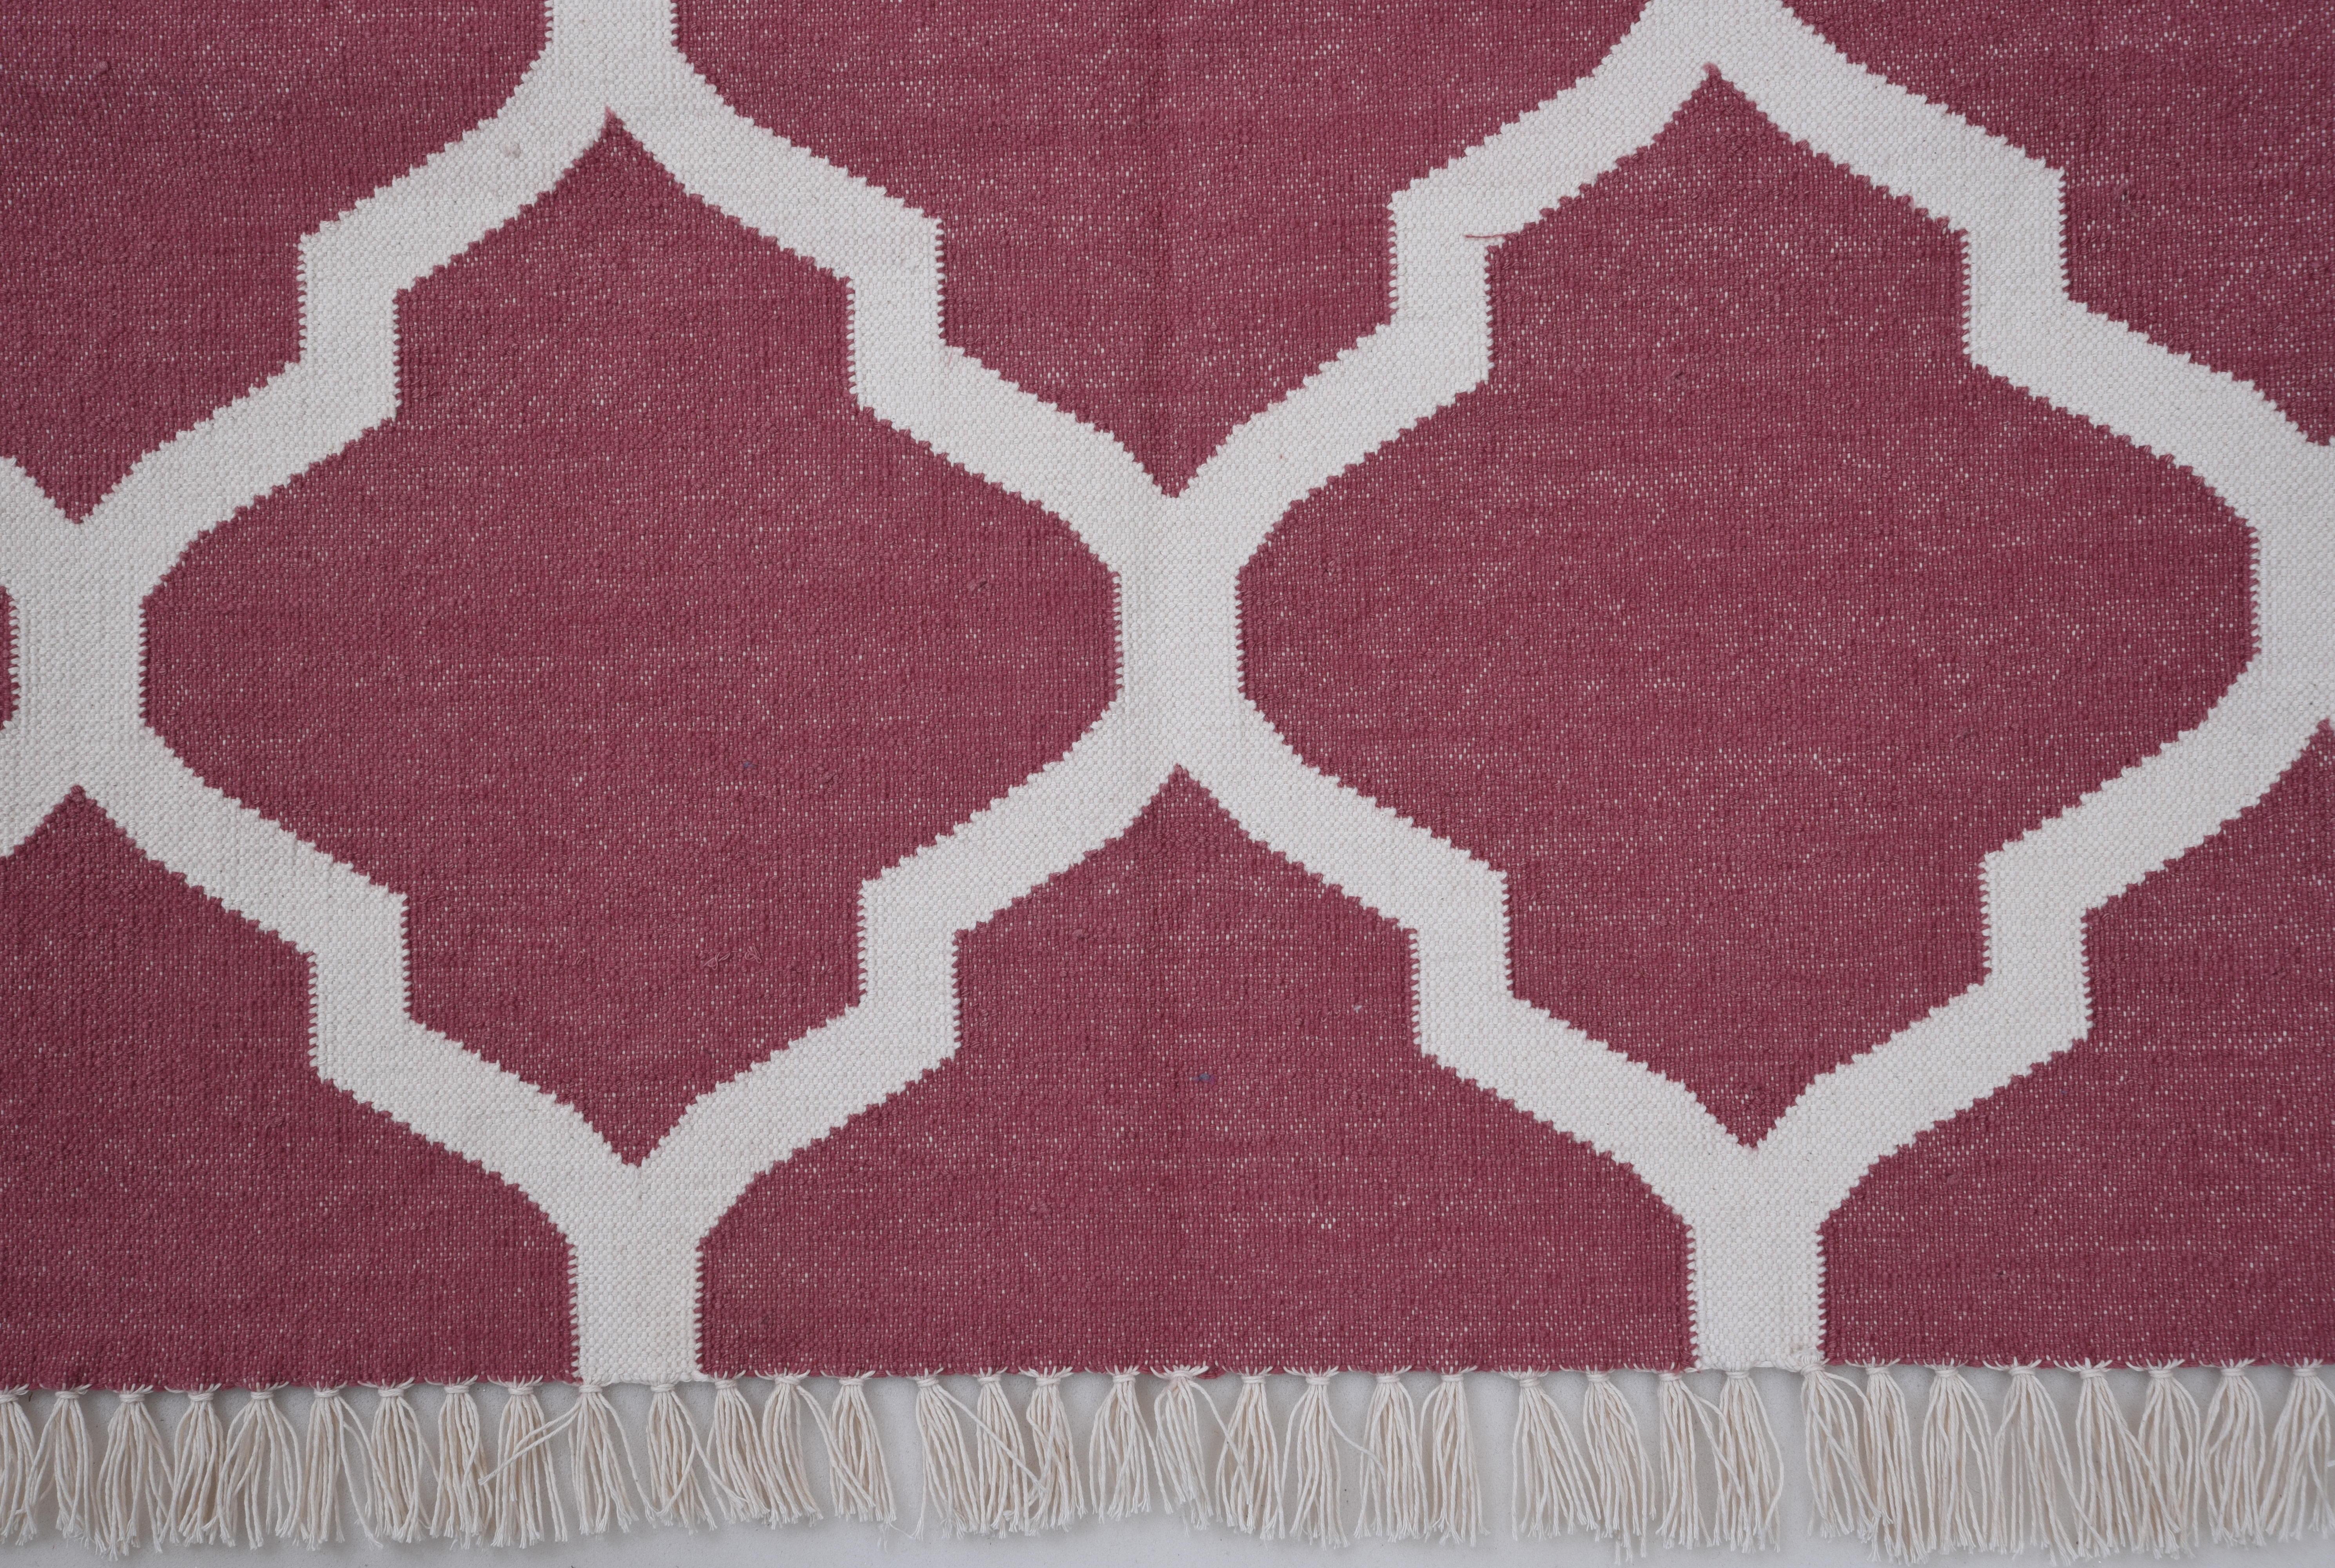 Hand-Woven Handmade Cotton Area Flat Weave Rug, 3x5 Maroon, White Geometric Indian Dhurrie For Sale